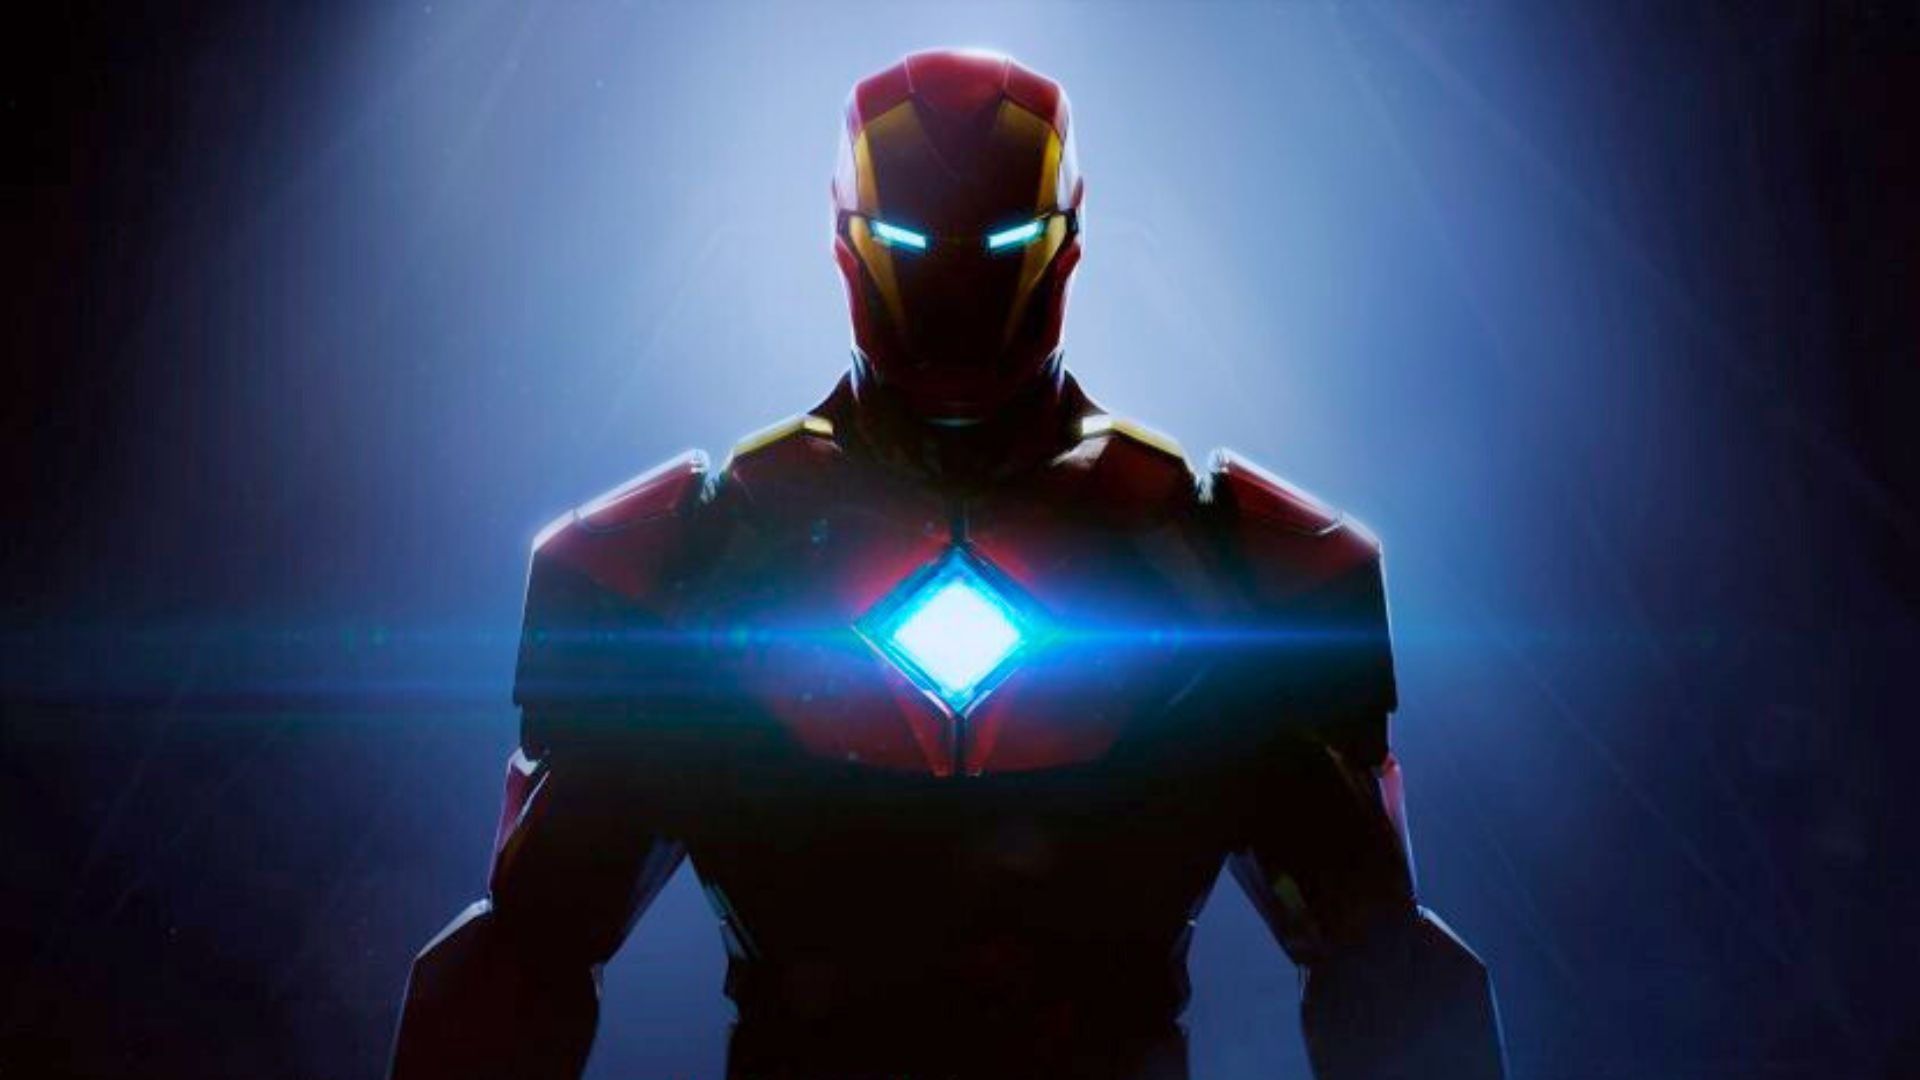 EA's upcoming Iron Man game will have an open world